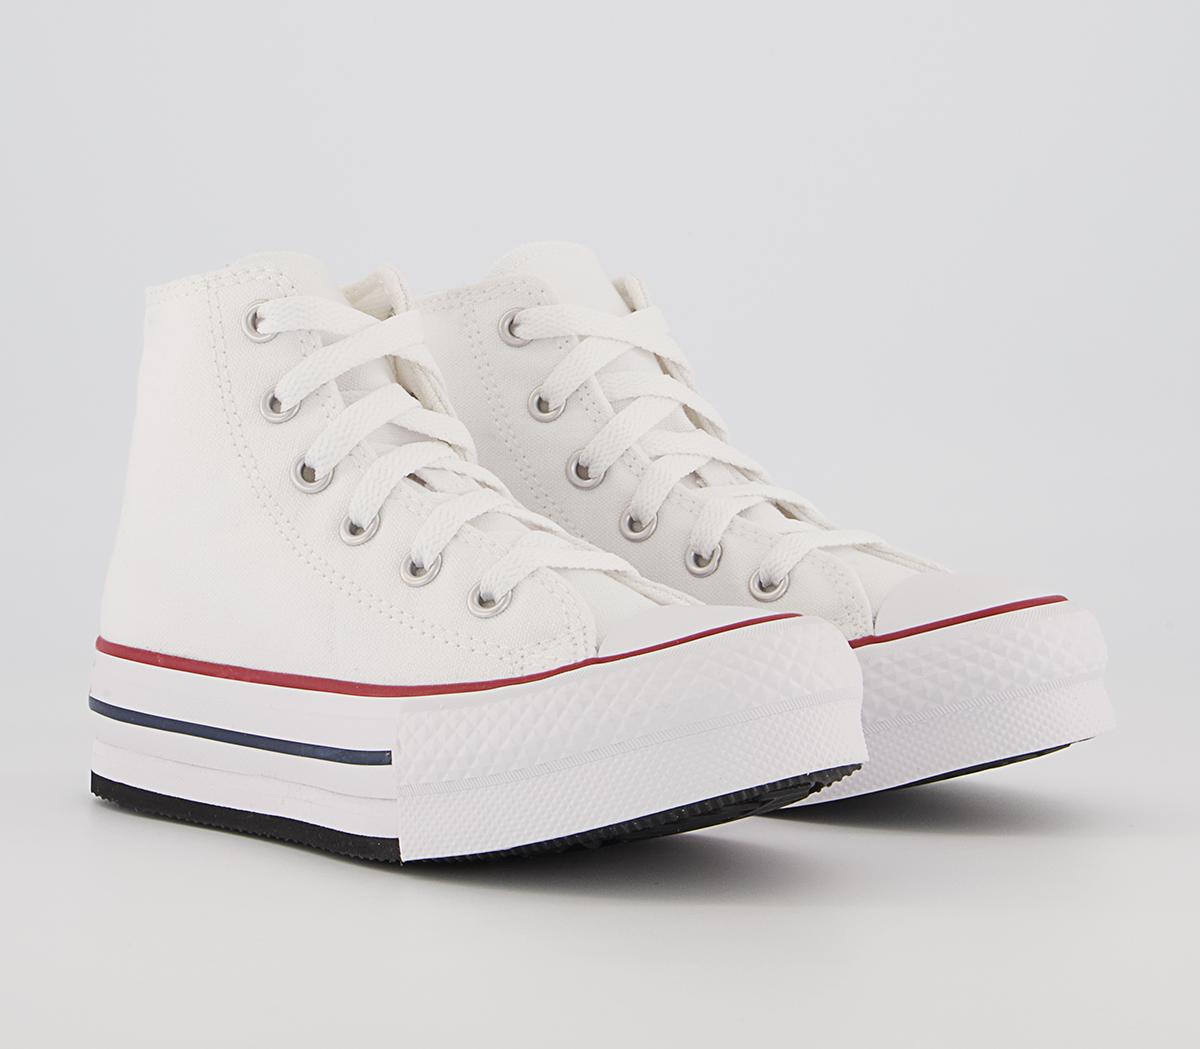 Converse Kids All Star Eva Lift Hi Trainers White Black Synthetic, 1 Youth